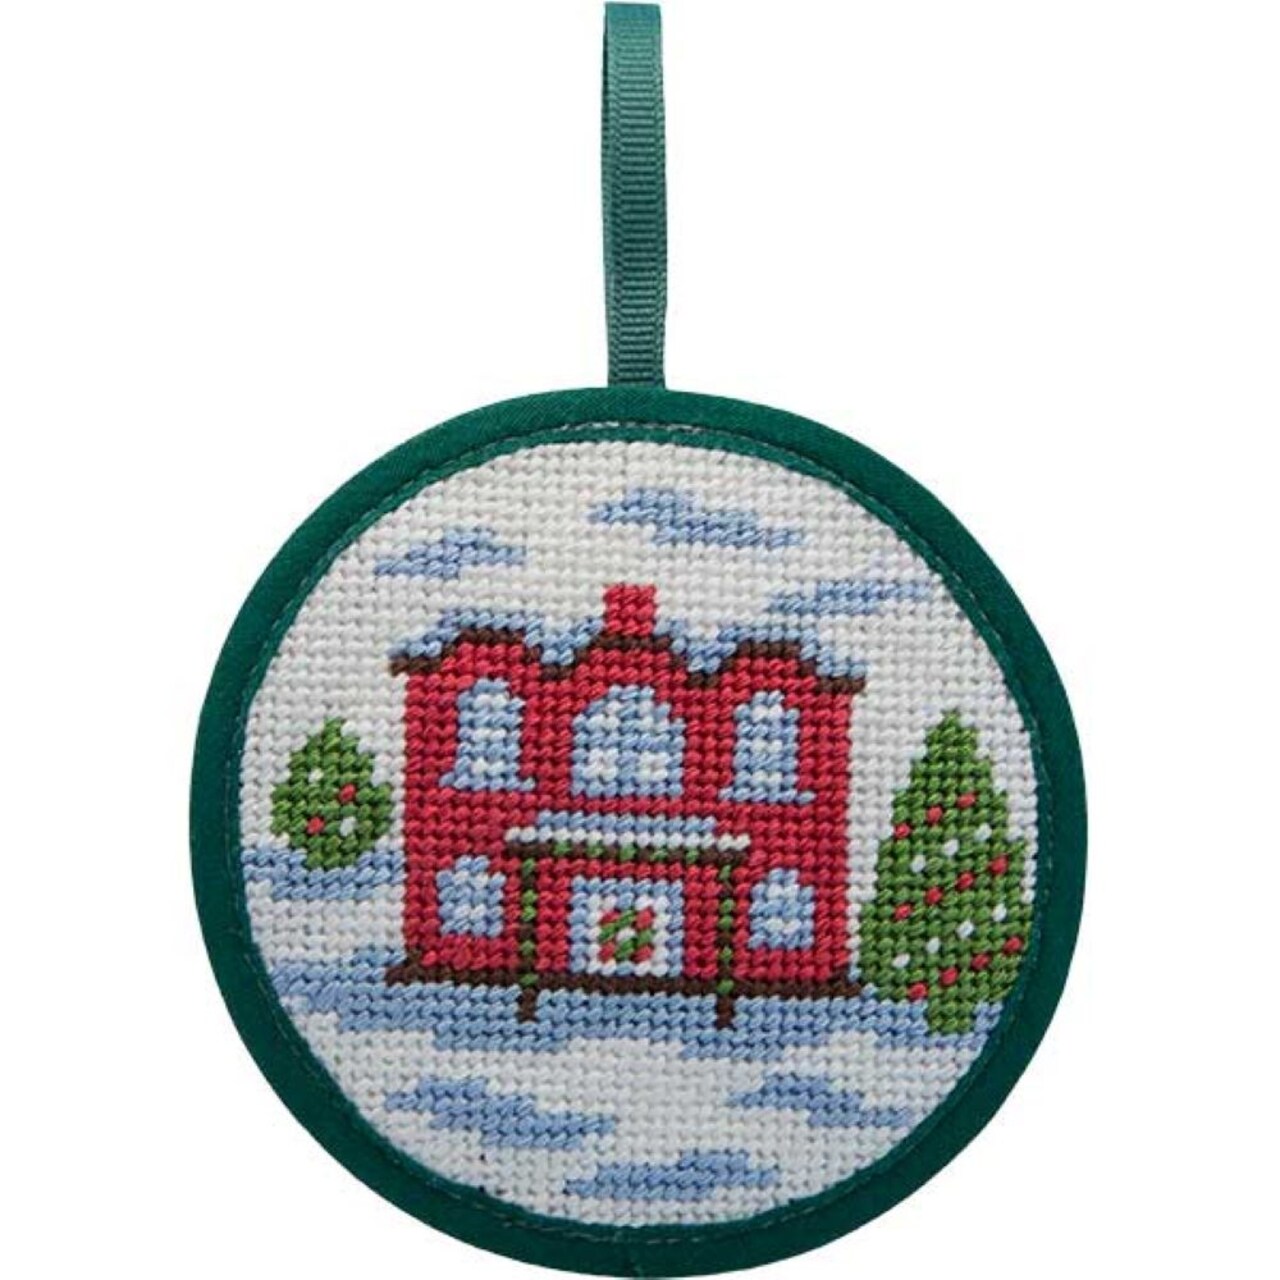 Alice Peterson Stitch-Ups Needlepoint Ornament Kit- Red House